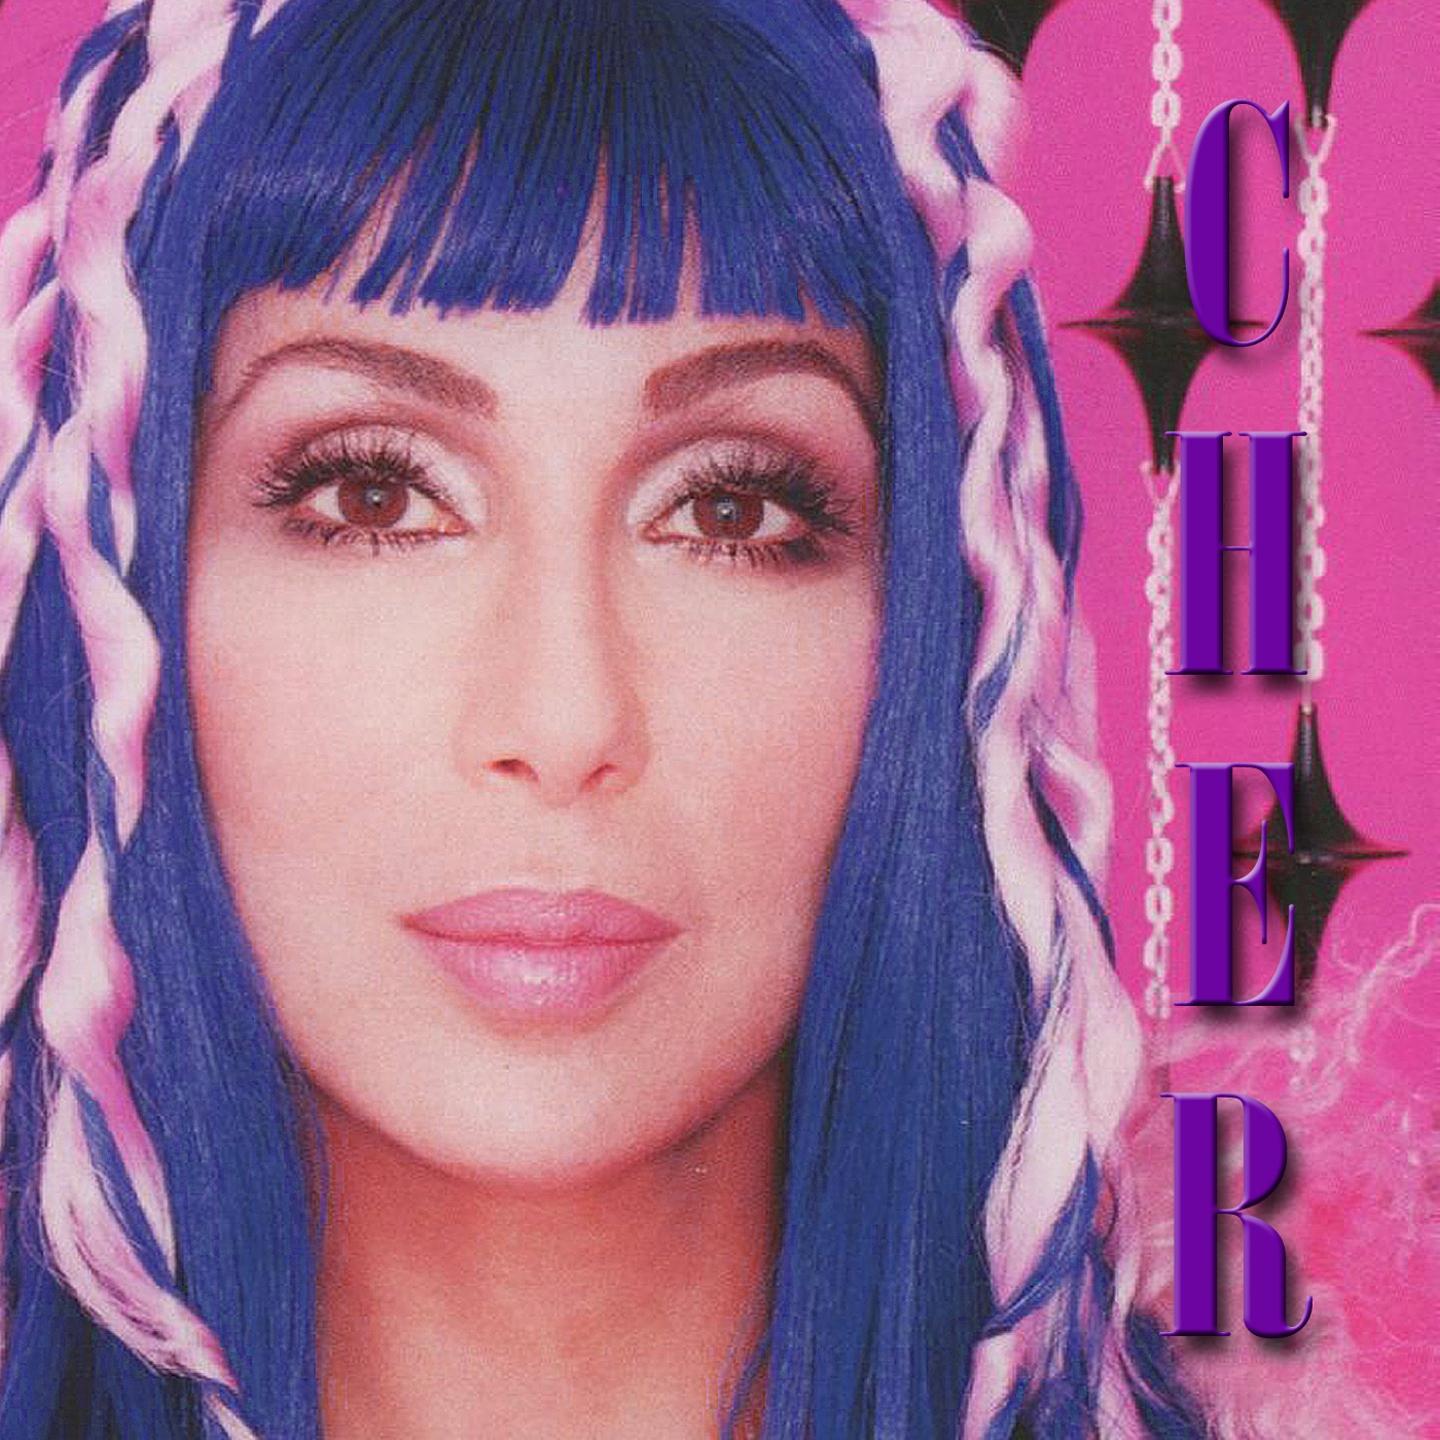 Cher - The Way of Love (Live at The Caesars Palace 1994)